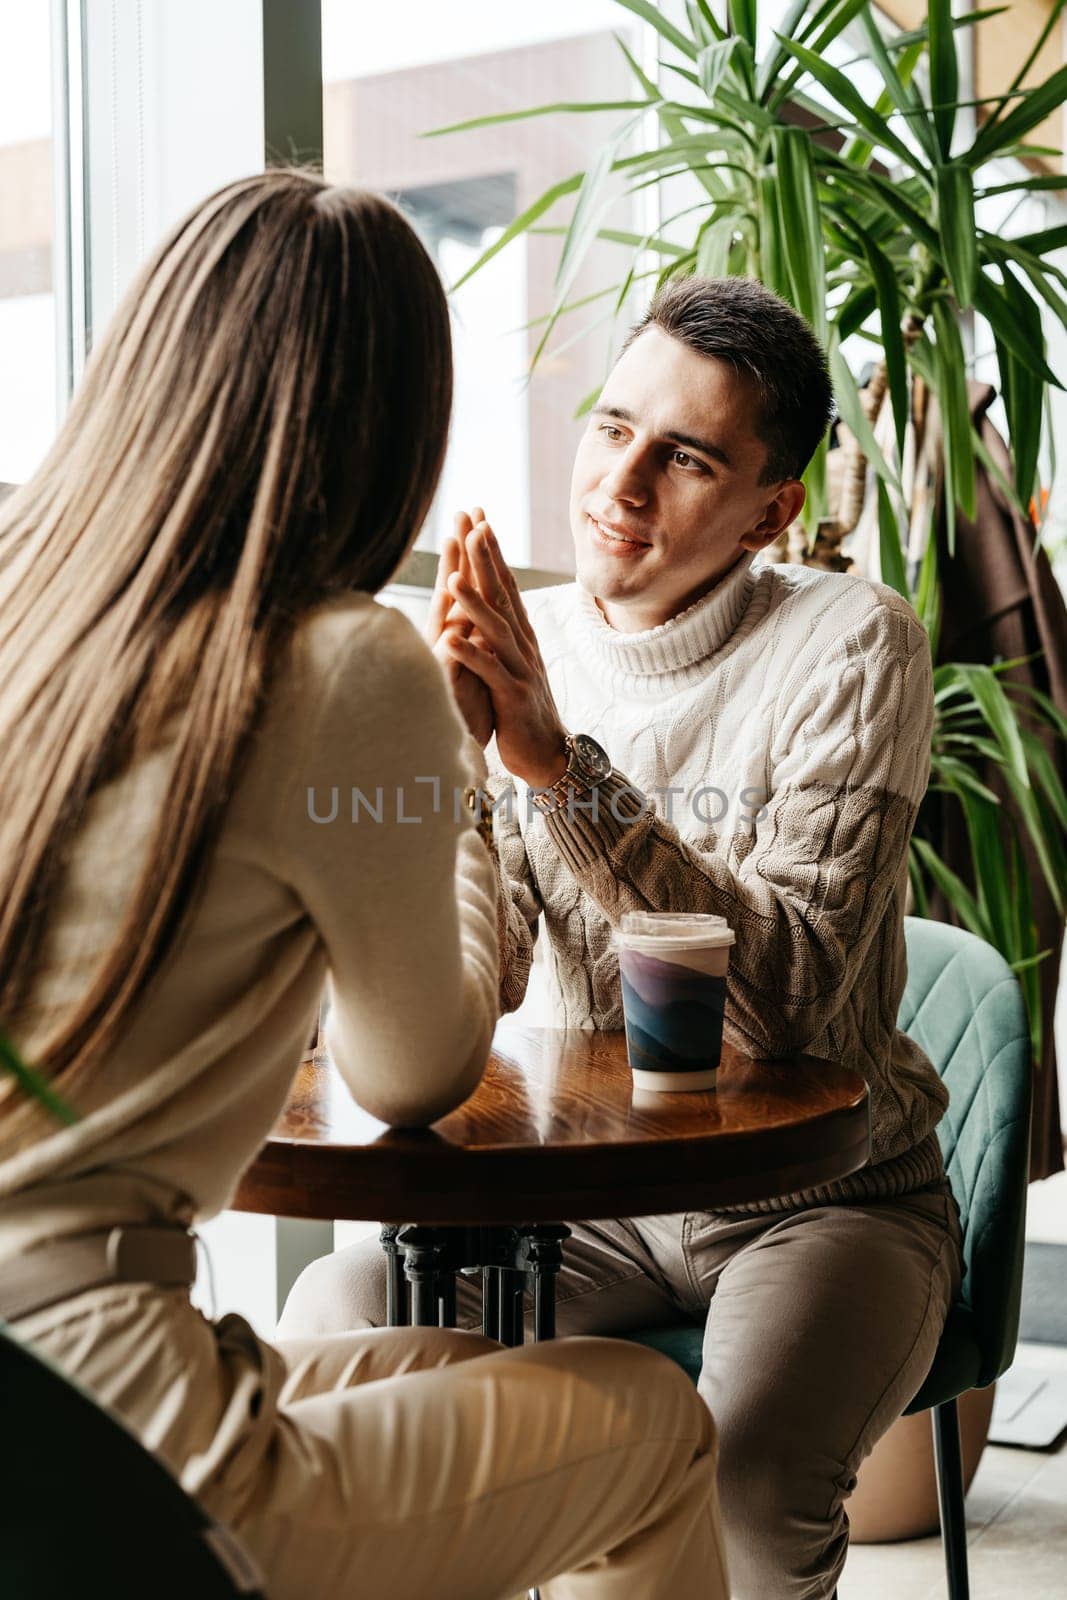 A man and woman are seated opposite each other at a small table, deeply engaged in a conversation. The man, wearing a white knit sweater, listens attentively to the woman with his hands gently clasped. The warm ambiance of the cafe, with soft natural light spilling in, adds to the intimate setting.